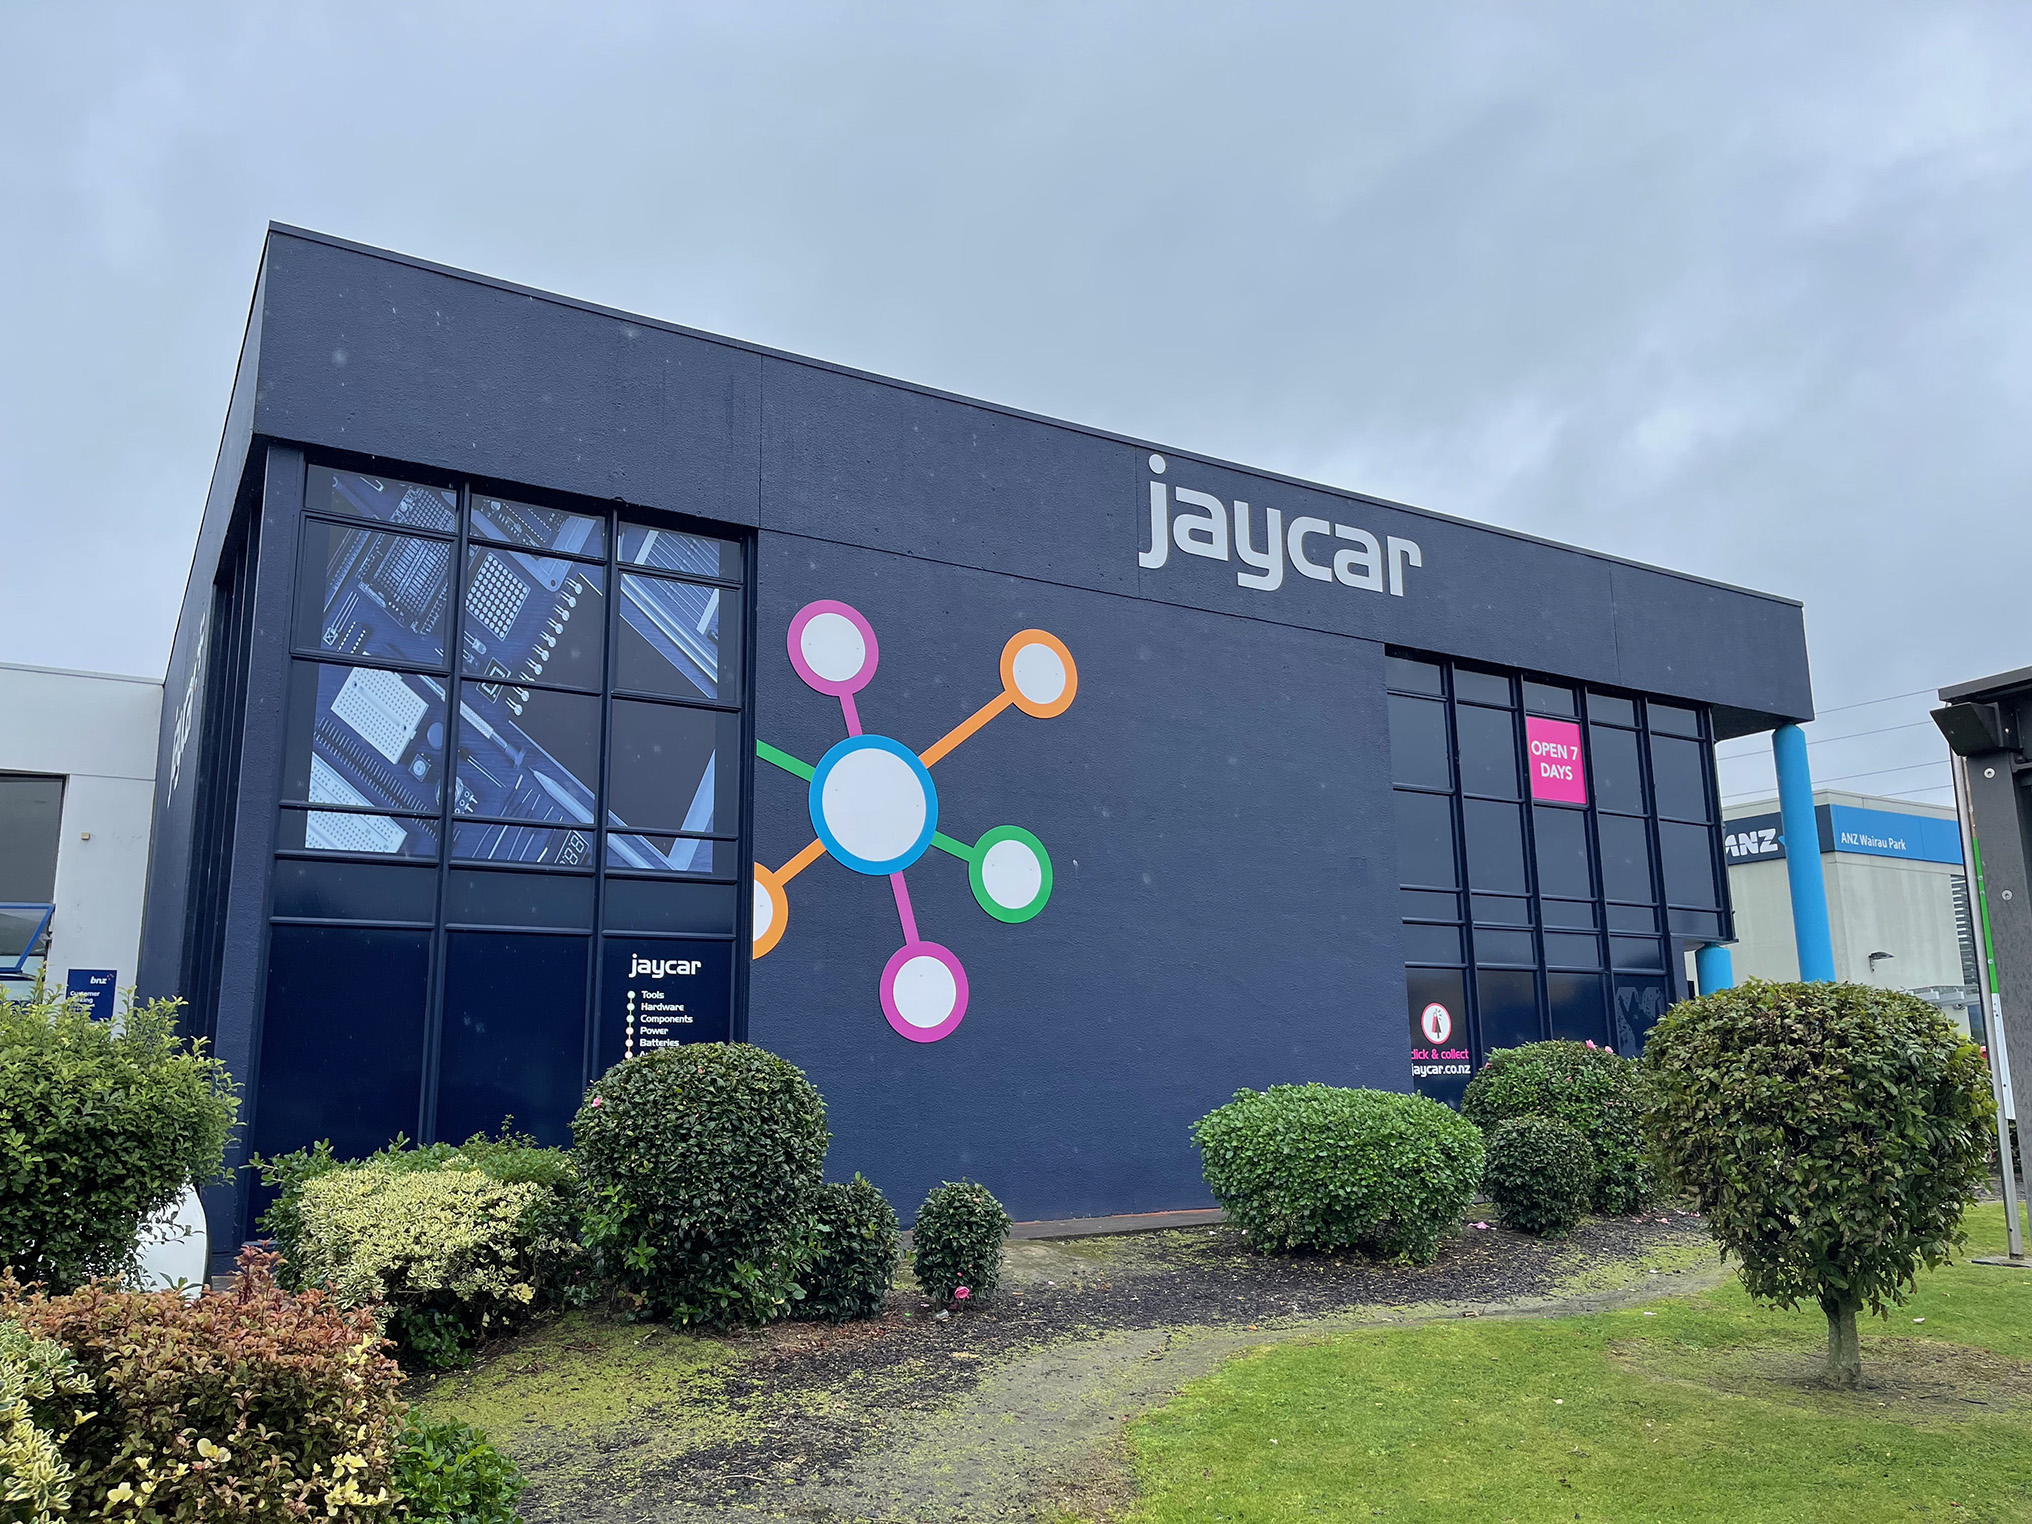 Jaycar completed with signage